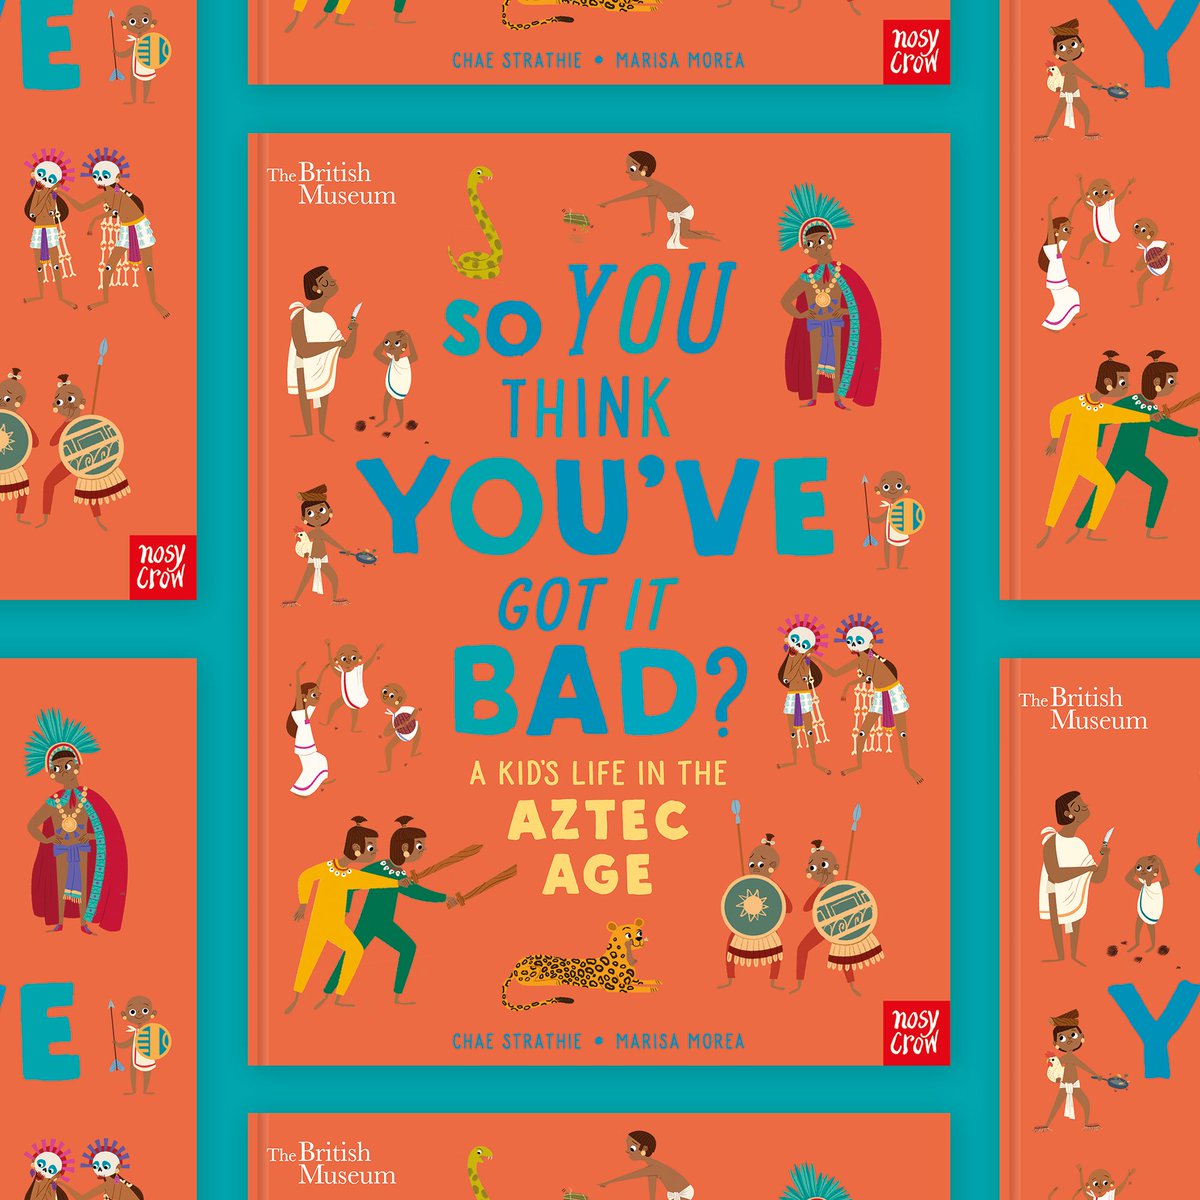 Modern life can be tough! But at least you don't have to eat MAGGOTS or take COLD BATHS... 🌵 #SoYouThinkYouveGotItBad: Aztec Age, by @chaestrathie and @marisa_morea, is the latest in the FACT-FILLED and HILARIOUS series for kids! Find out more: bit.ly/37qgriA